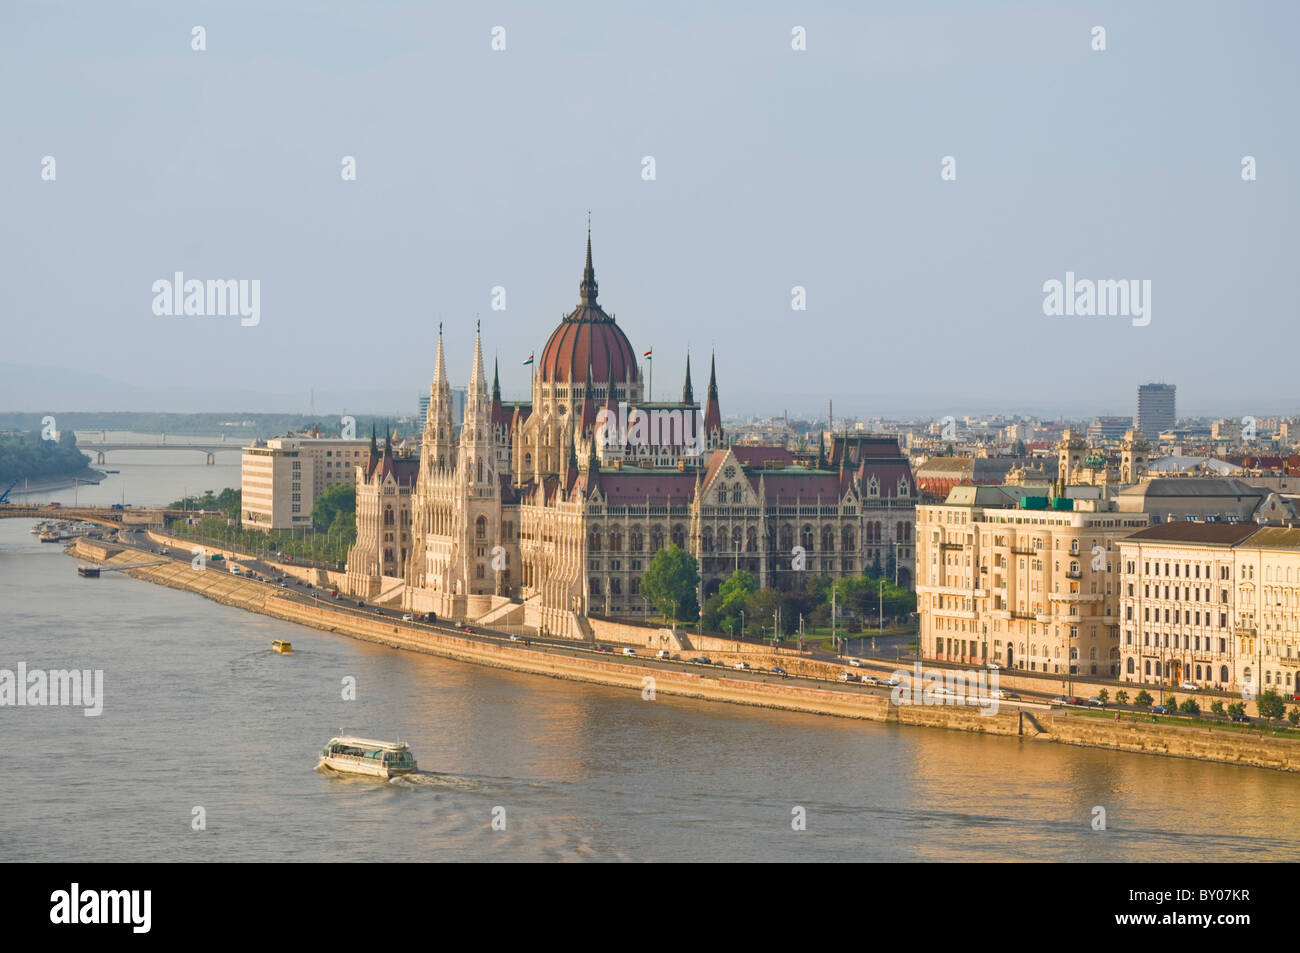 Hungarian Parliament building designed by Imre Steindl with the river Danube in the foreground, Budapest, Hungary, Europe, EU Stock Photo